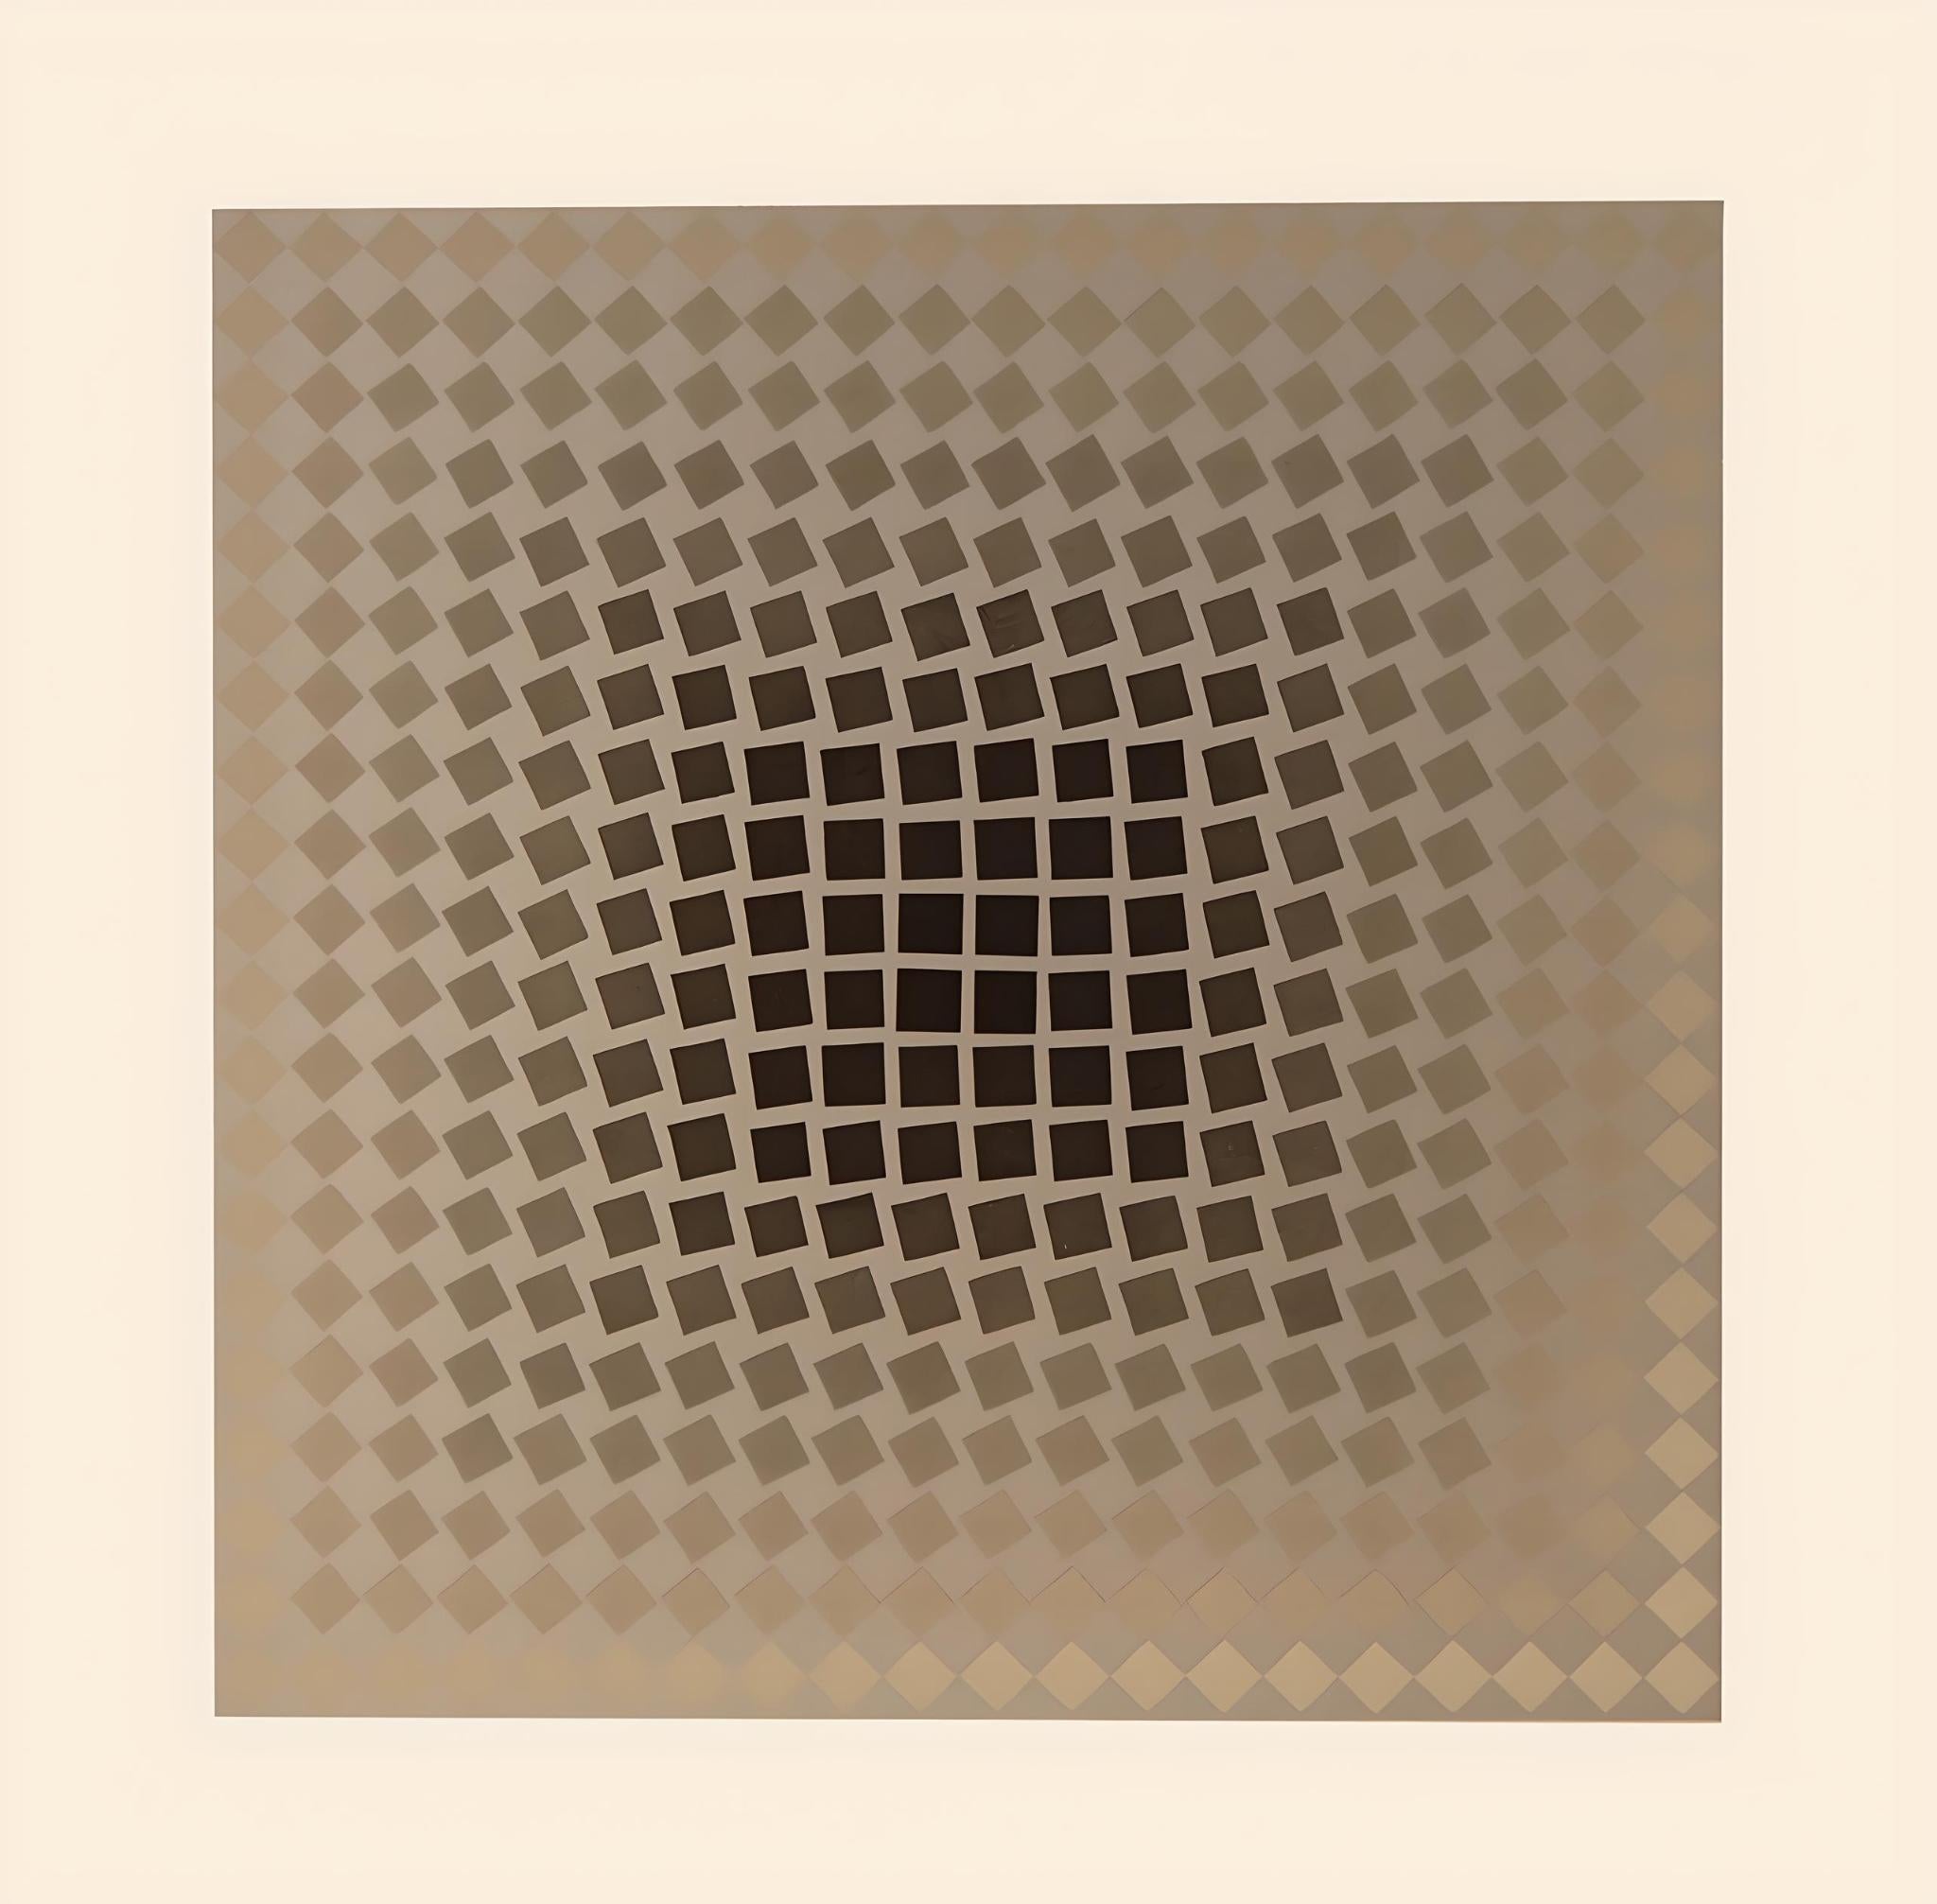 Vasarely, Composition, CTA 102 (after)